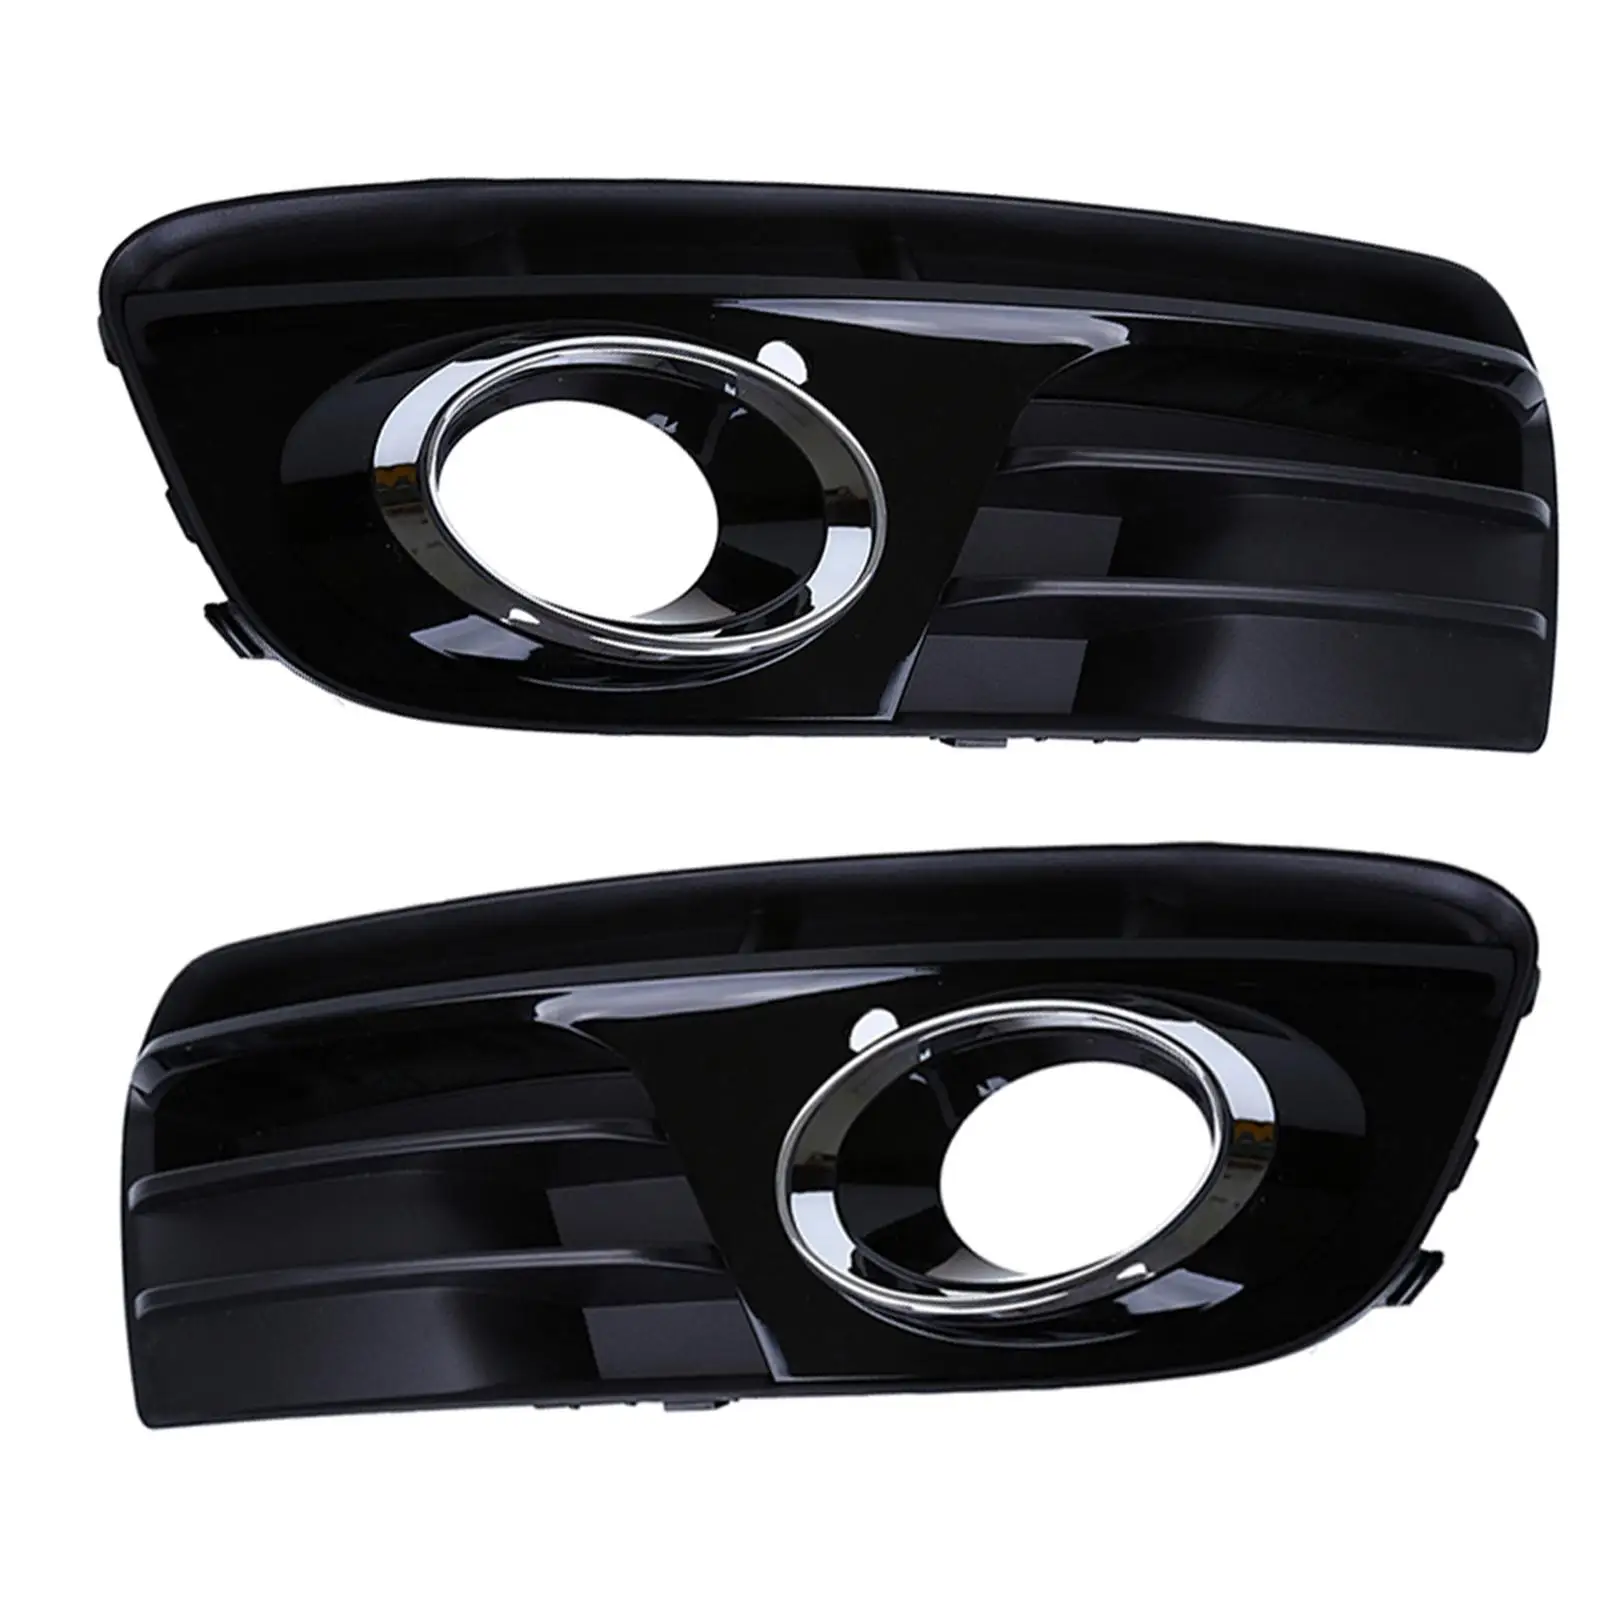 Fog Light Cover Durable Automobile Accessory Replacement for Audi Q5 2013-2016